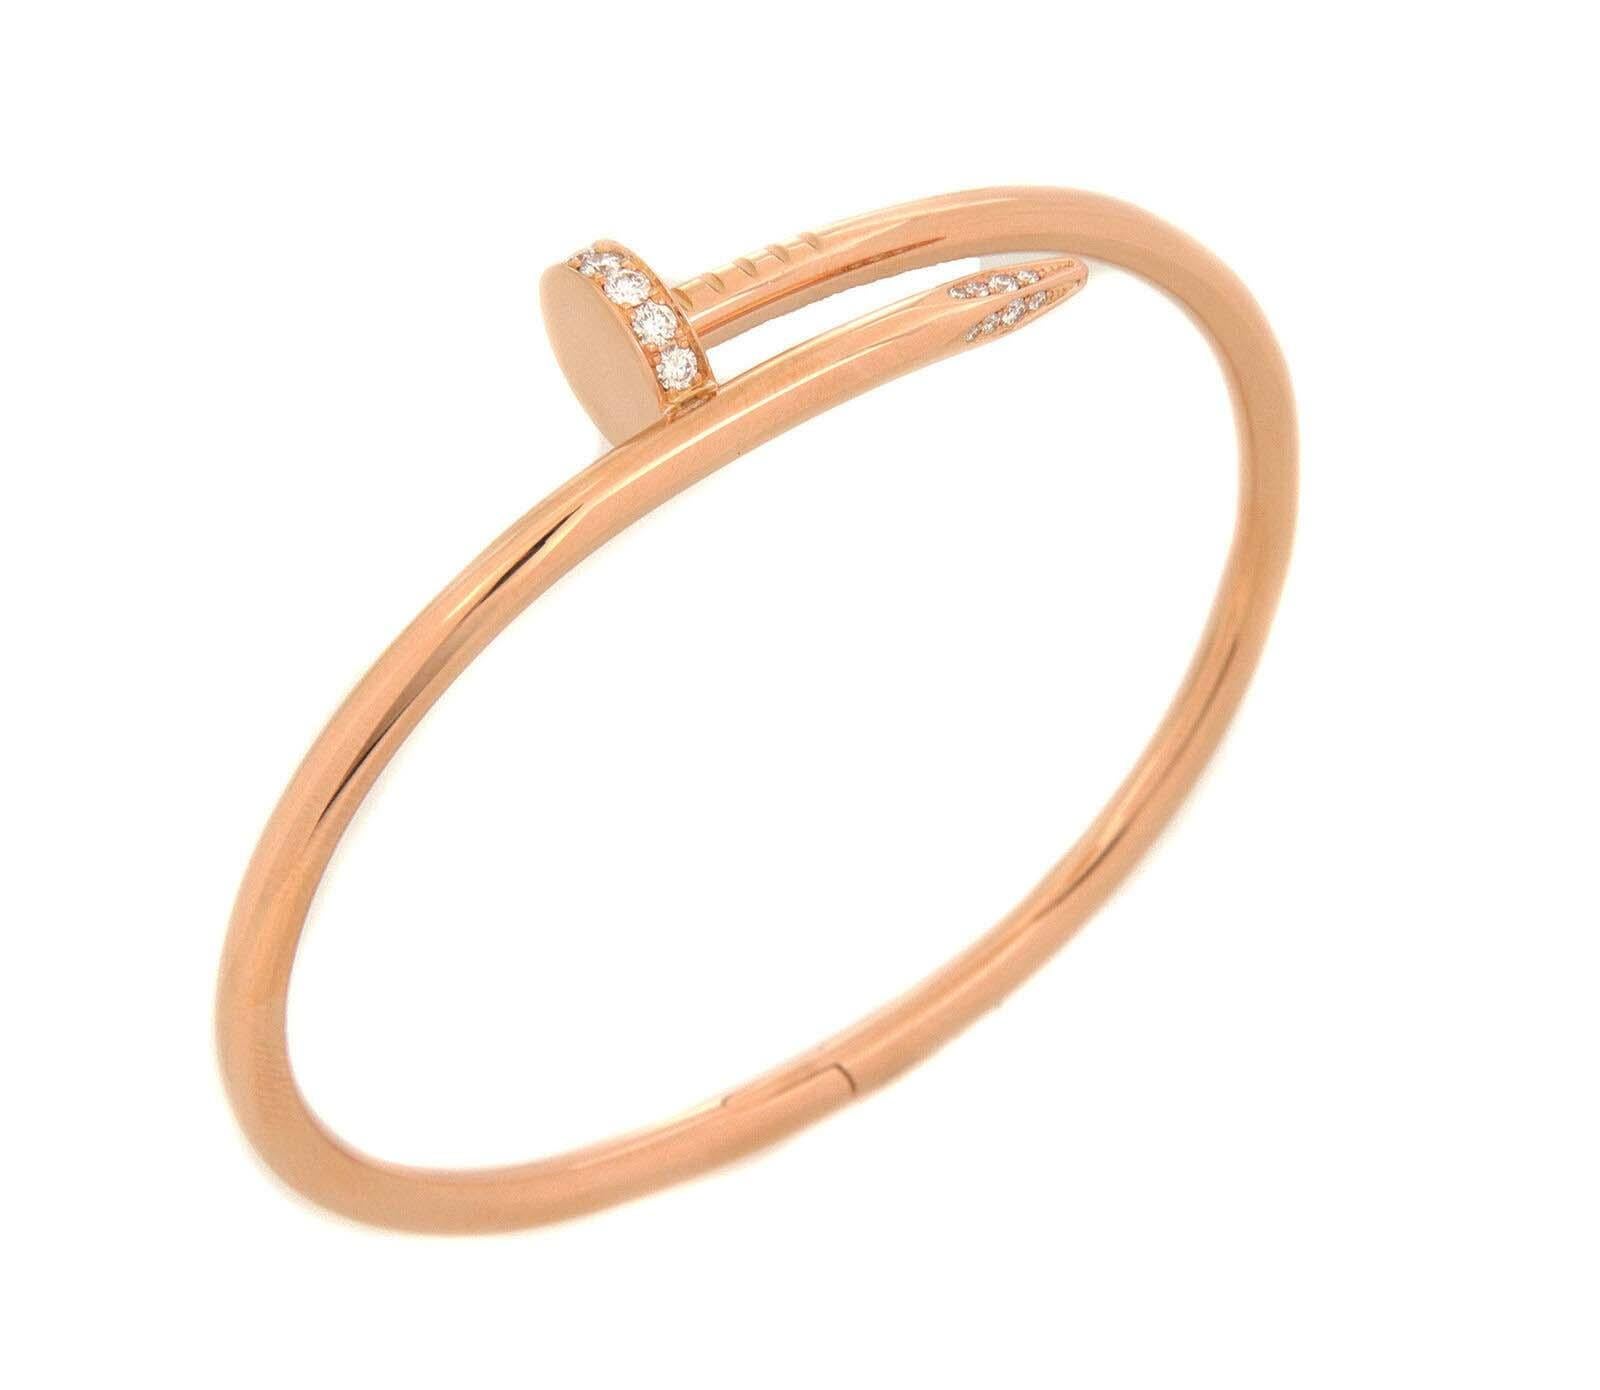 This is a chic authentic bangle by Cartier from the Juste un Clou Collection. It is crafted from 18k pink gold with a polished finish featuring a long nail wrap into a bangle in the bypass design. The head and tip of the nail is flat and decorated